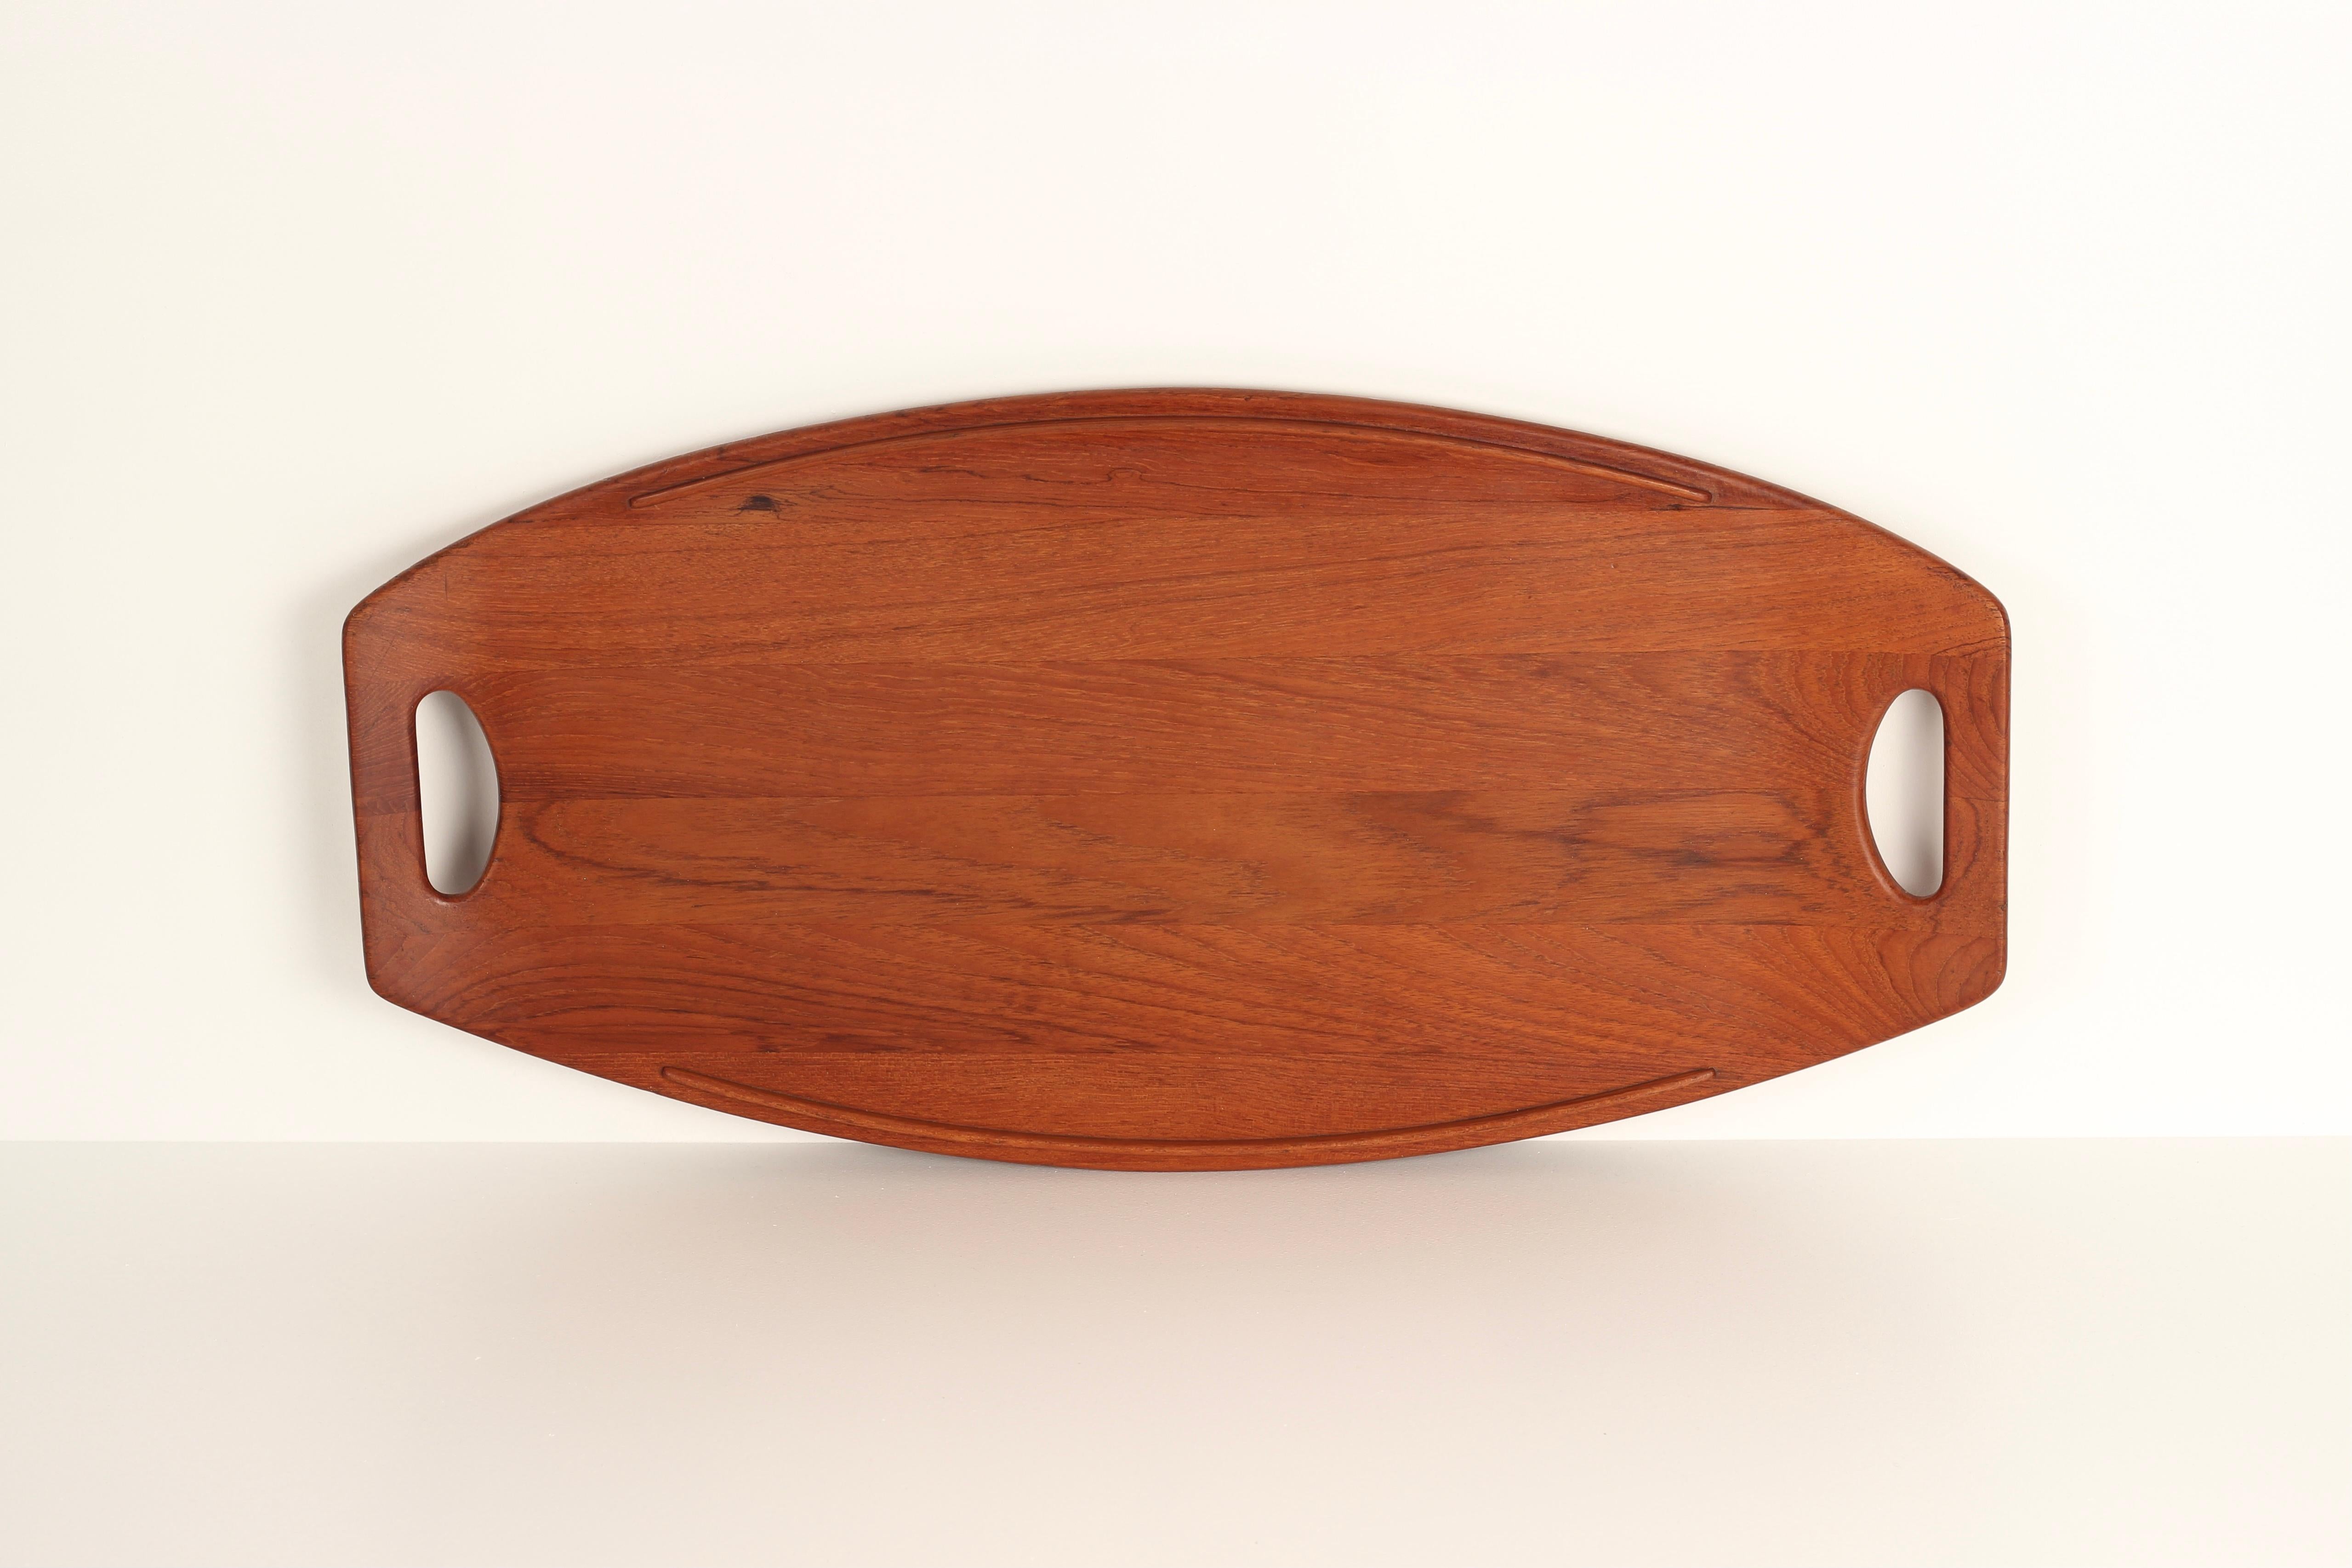 20th Century Mid-Century Modern Danish Designed Teak Tray by Jens Quistgaard Made by Dansk For Sale